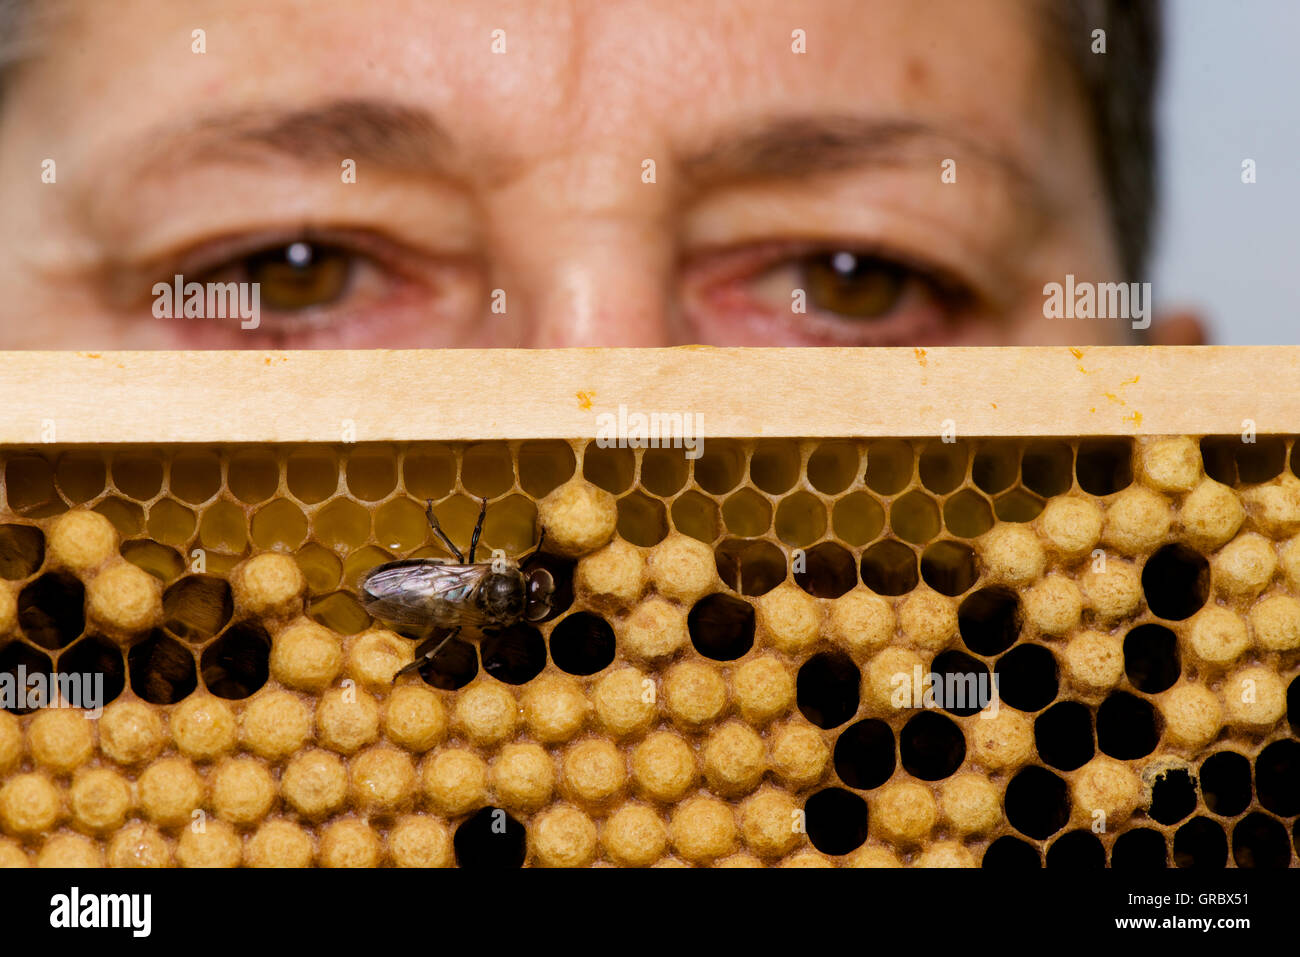 Female Apiarist With Broodcomb,Capped And Uncapped Cells, Drone Stock Photo